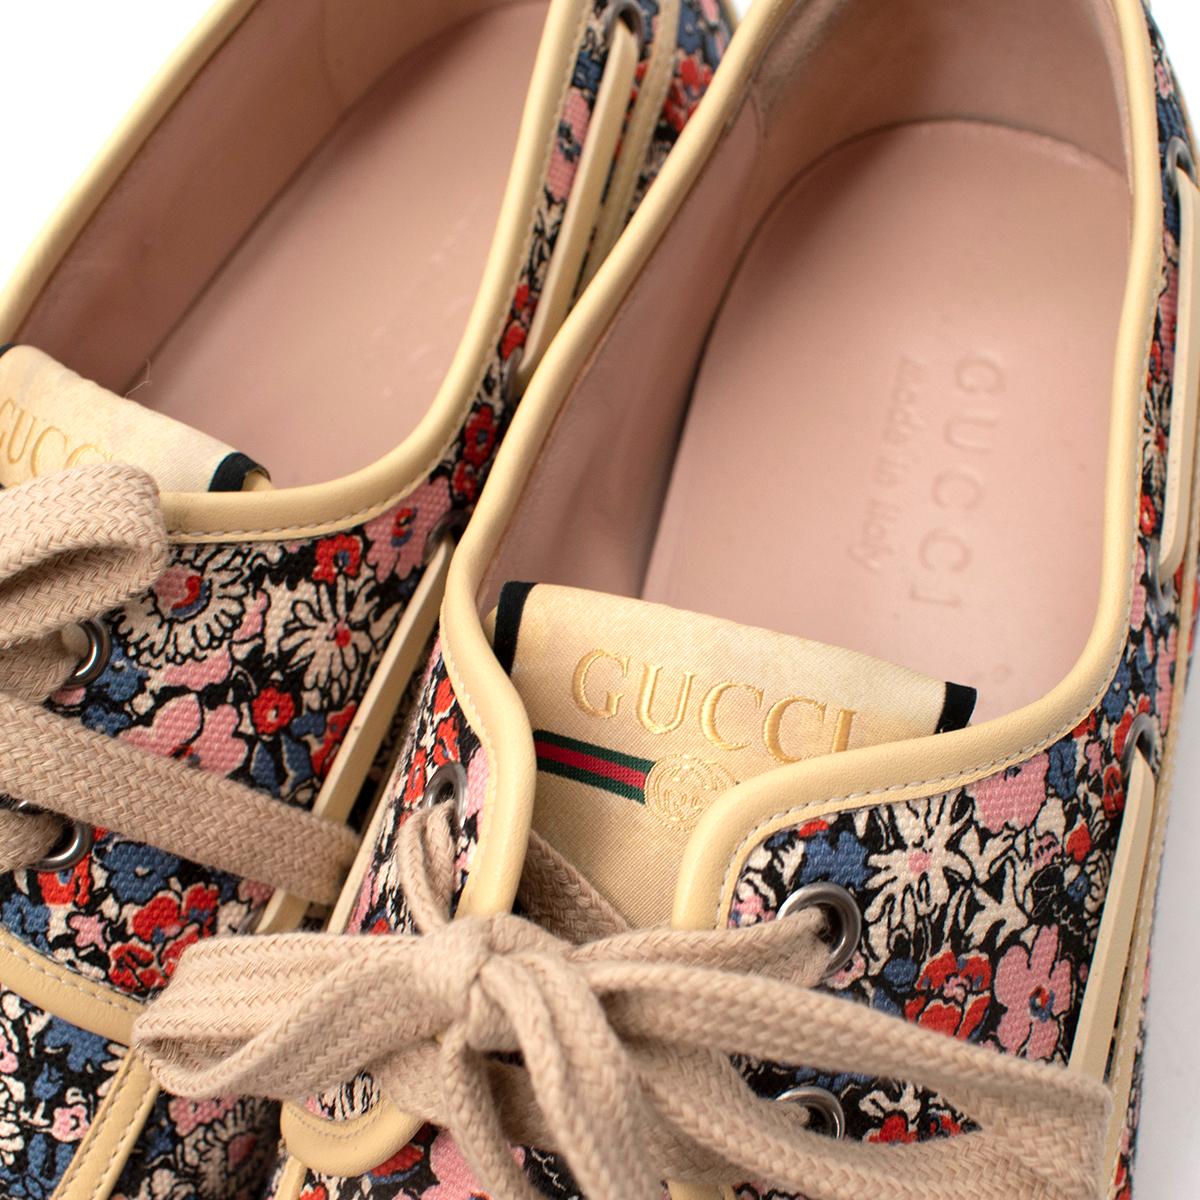 Gucci Liberty Floral Deck Shoes In Excellent Condition For Sale In London, GB